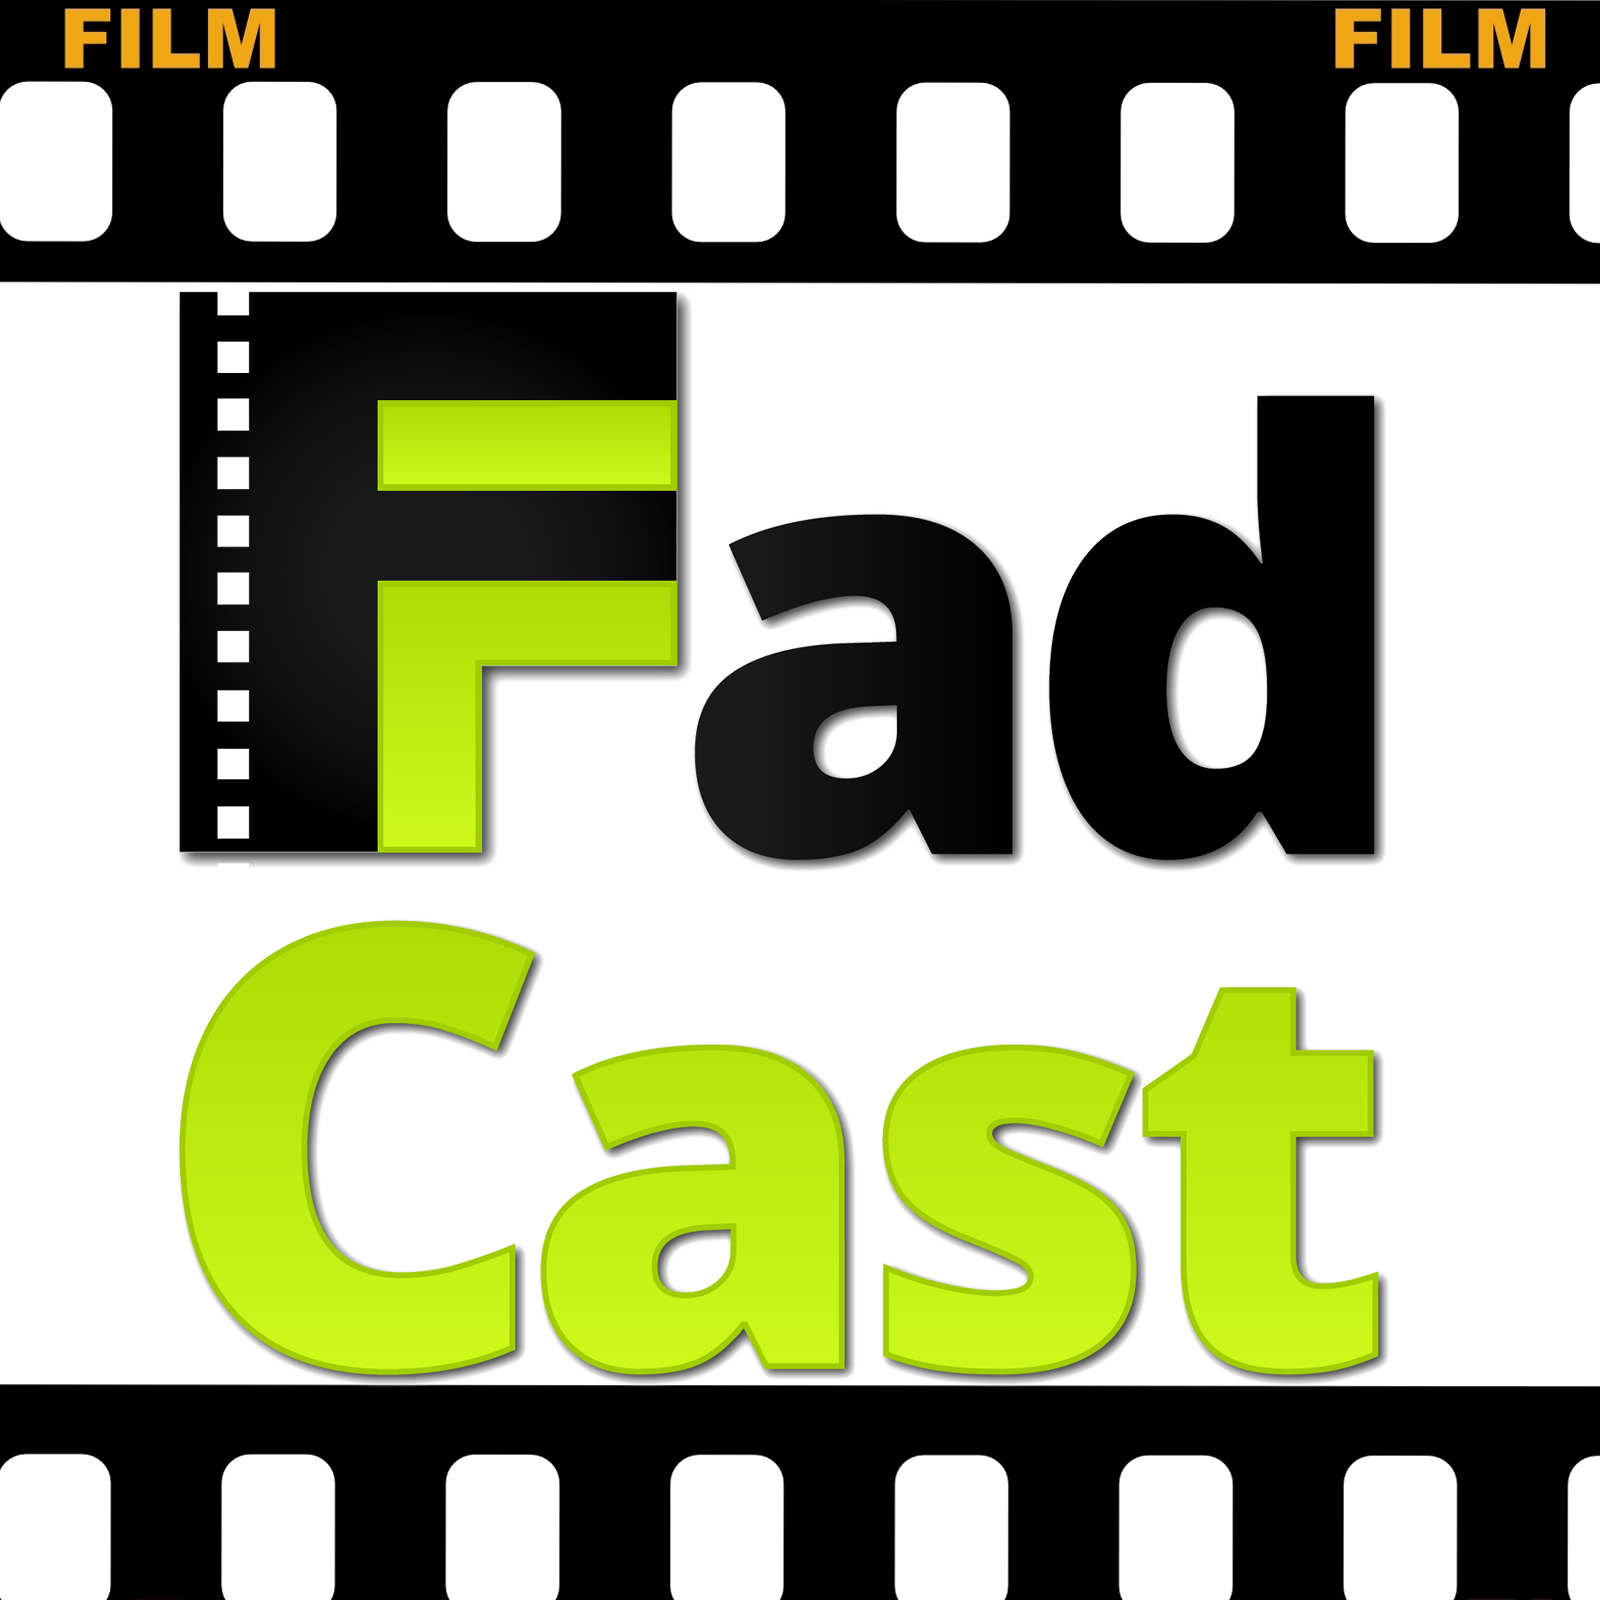 Listen Free To Fadcast Podcast About Film Fads Movies And Pop Culture On Iheartradio Podcasts